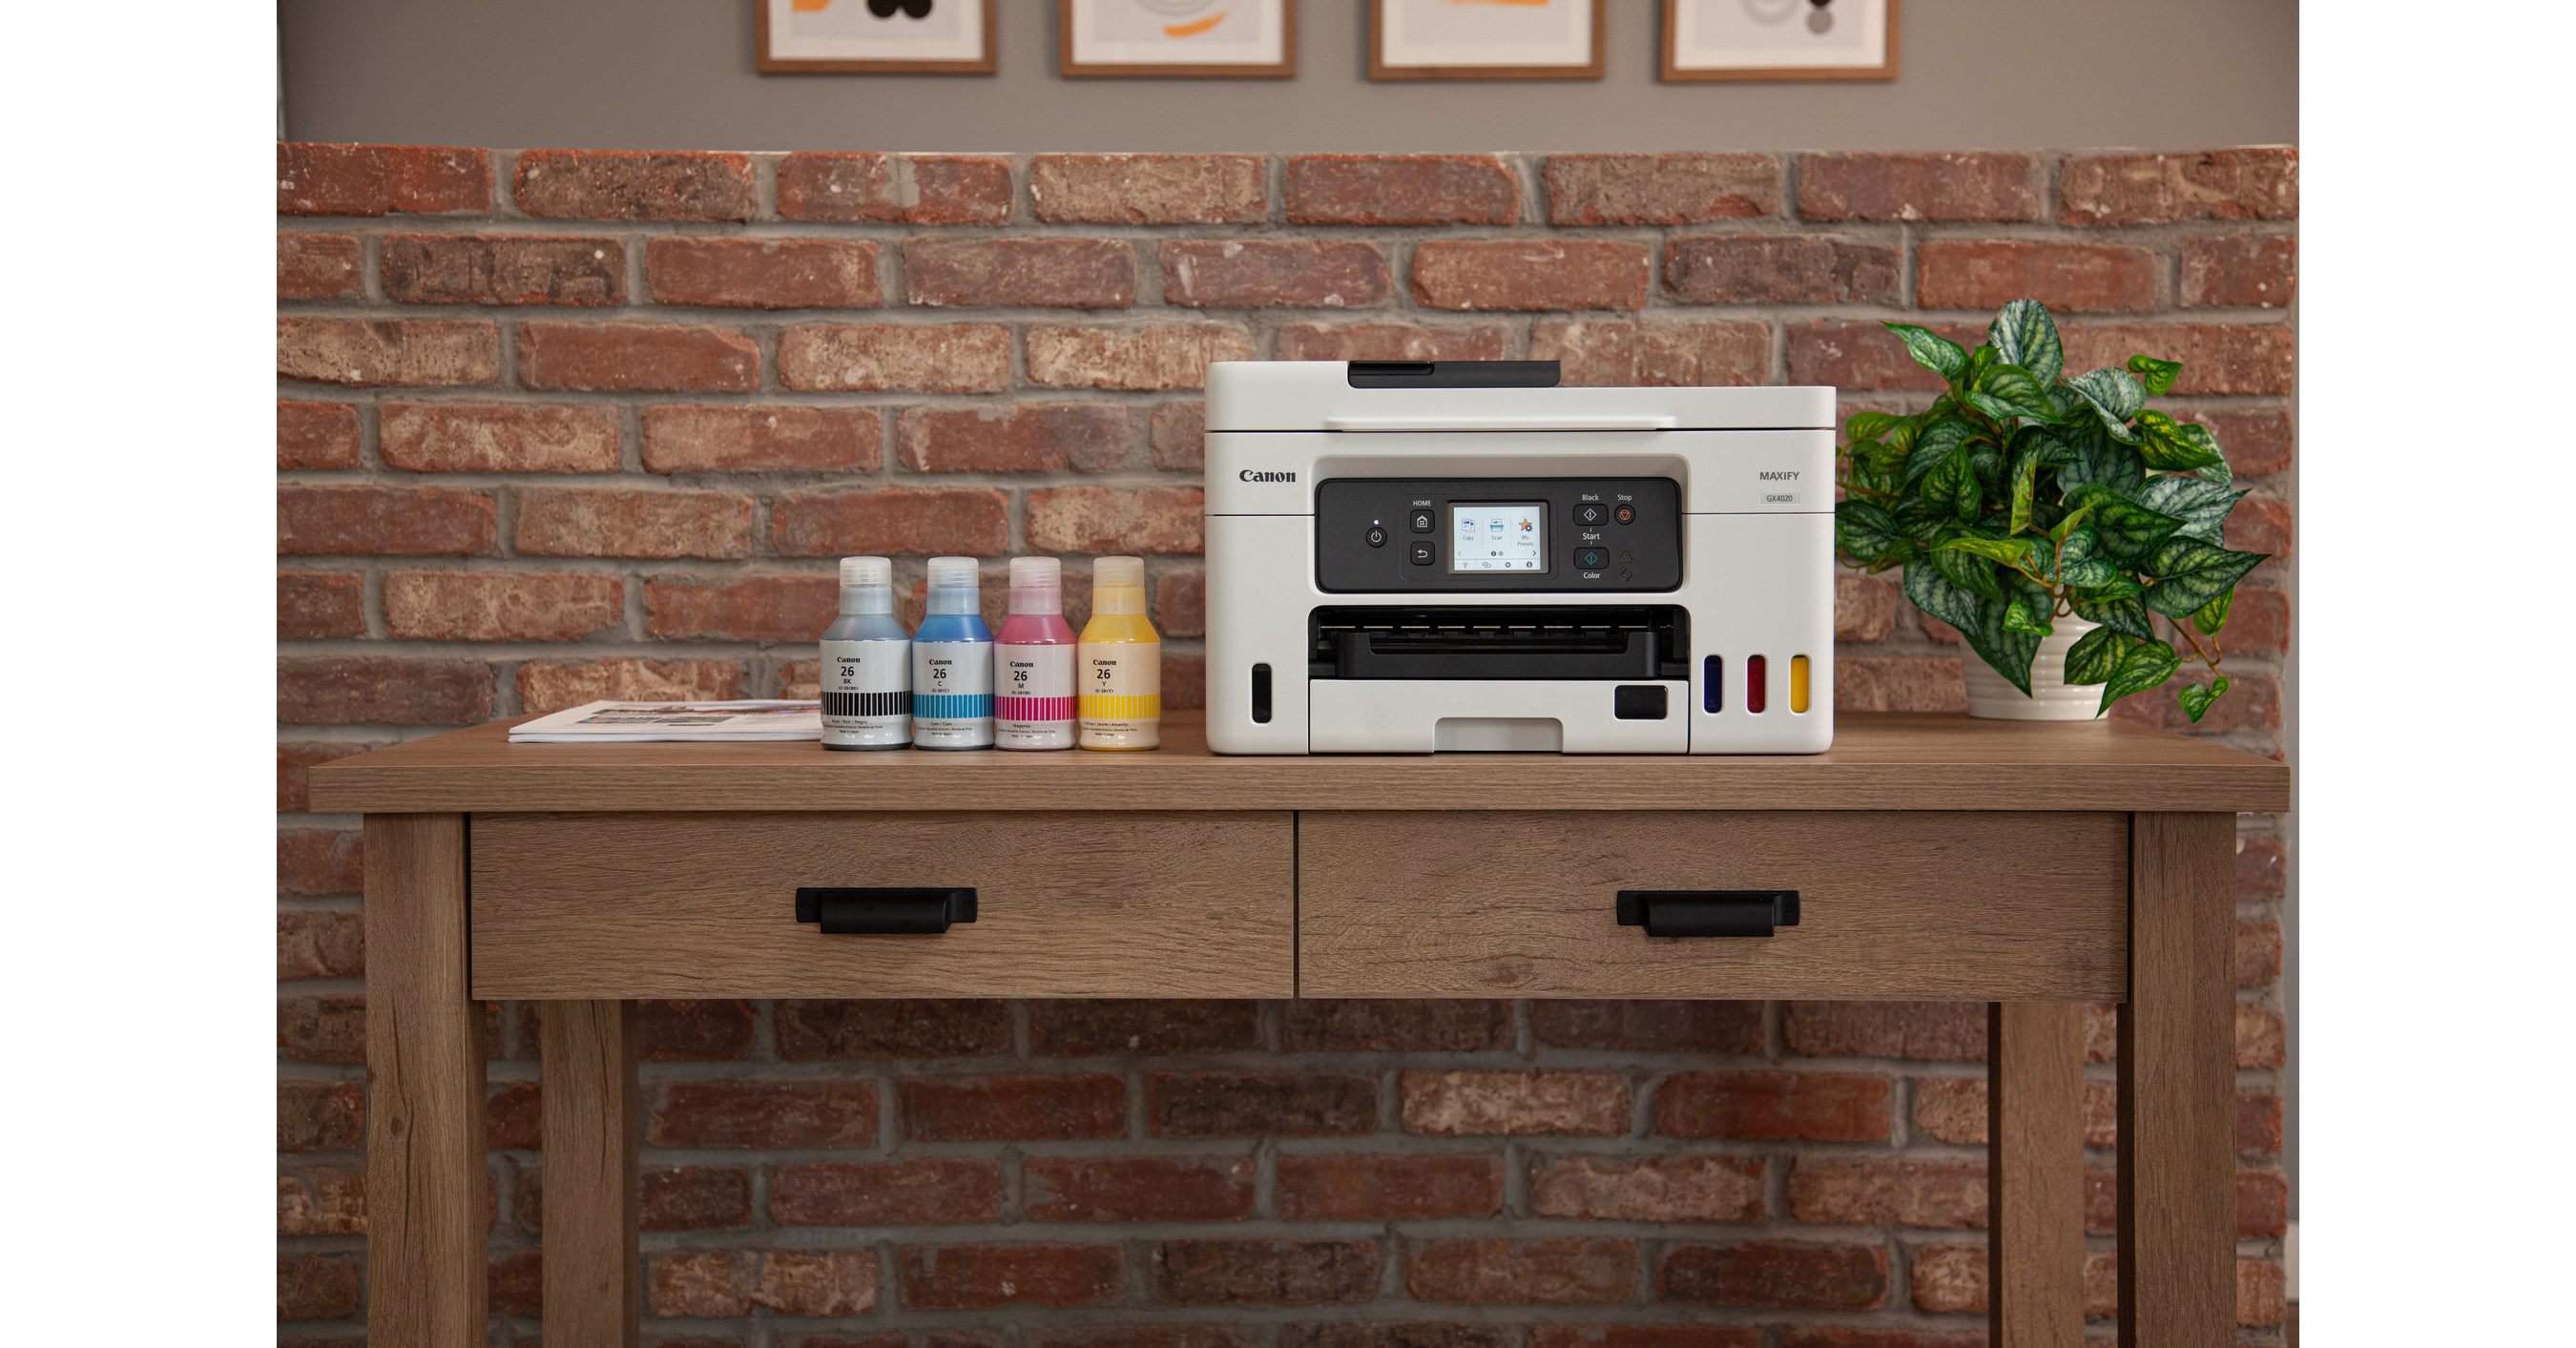 Canon Expands Business Inkjet and Laser Printer Portfolio with New Printers to Help Provide at